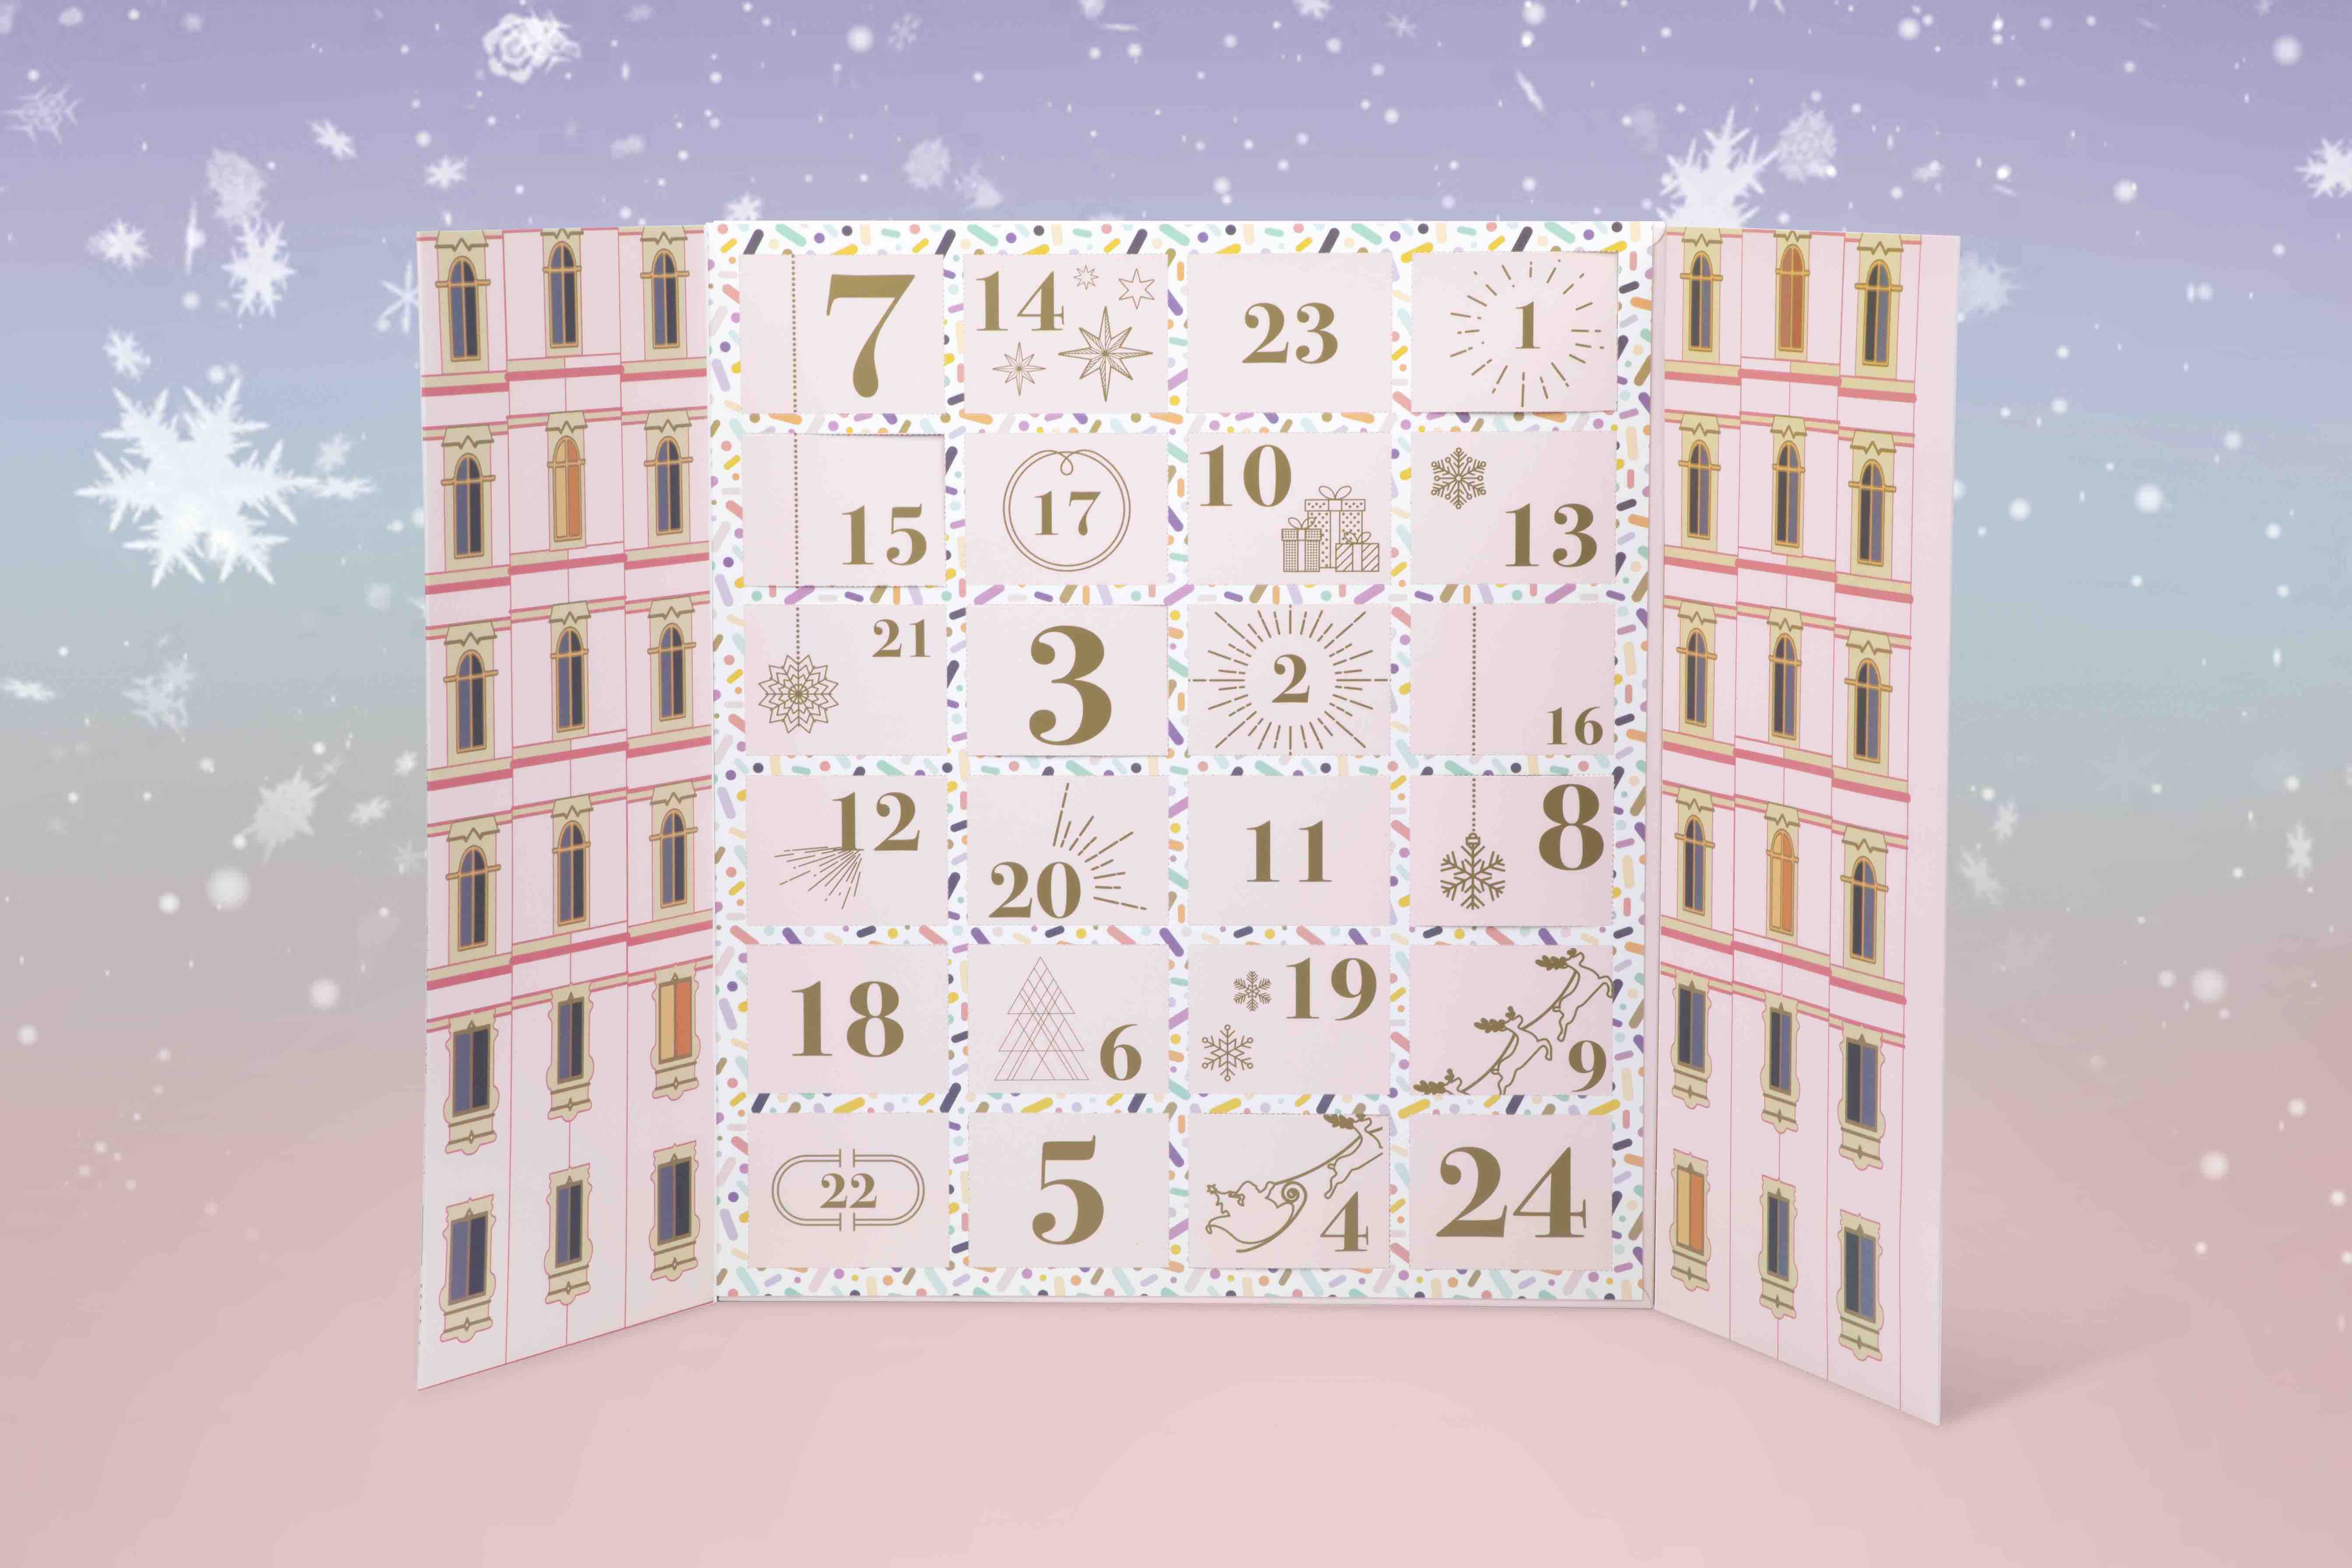 Sugargram’s Advent Calendar Delivers A Daily Dose Of Festive Cheer